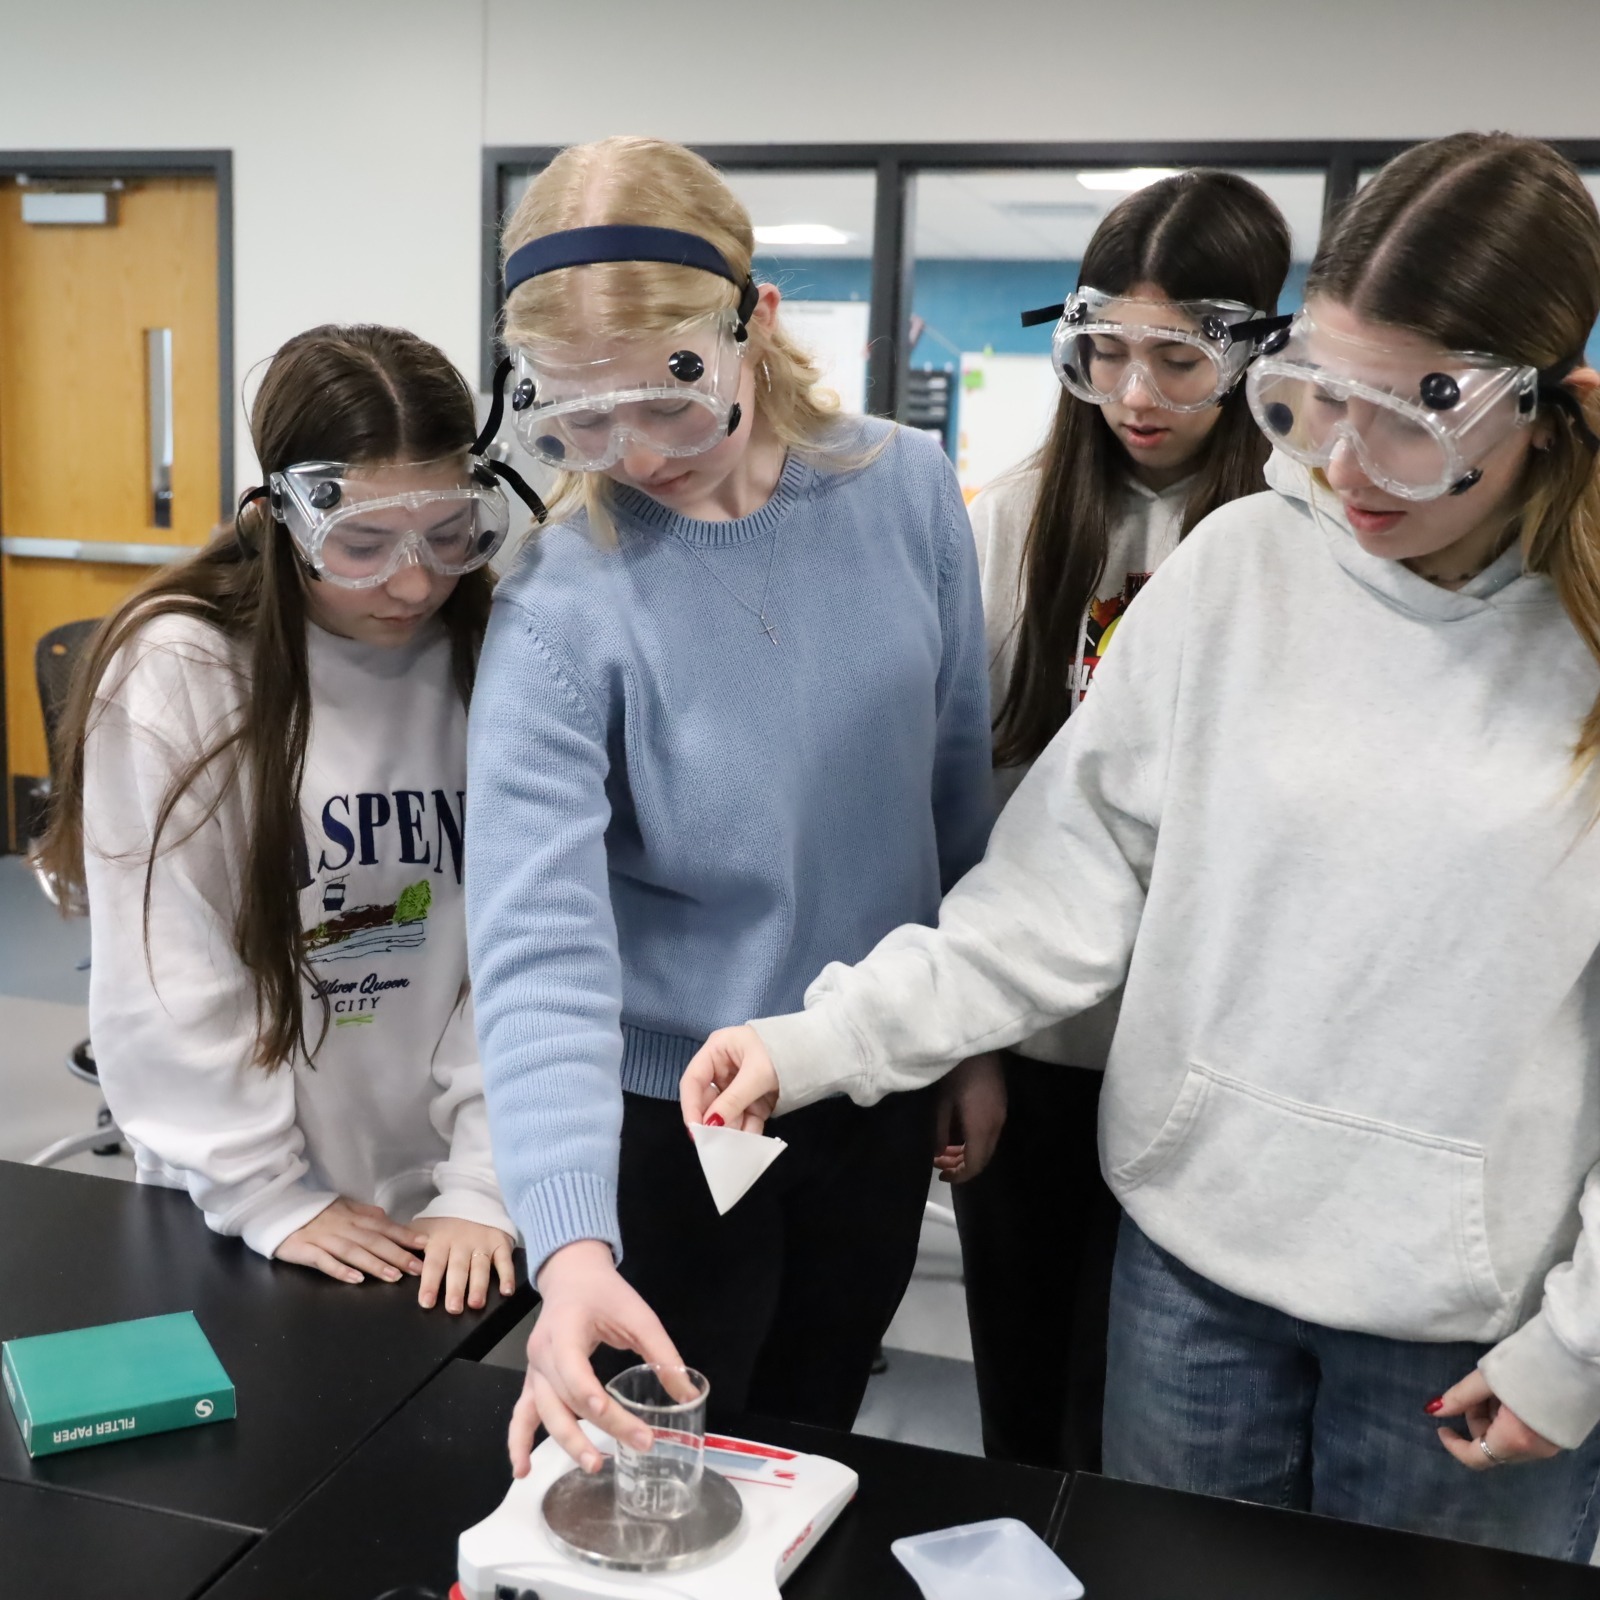 Chemistry experiment Four students together wearing goggles